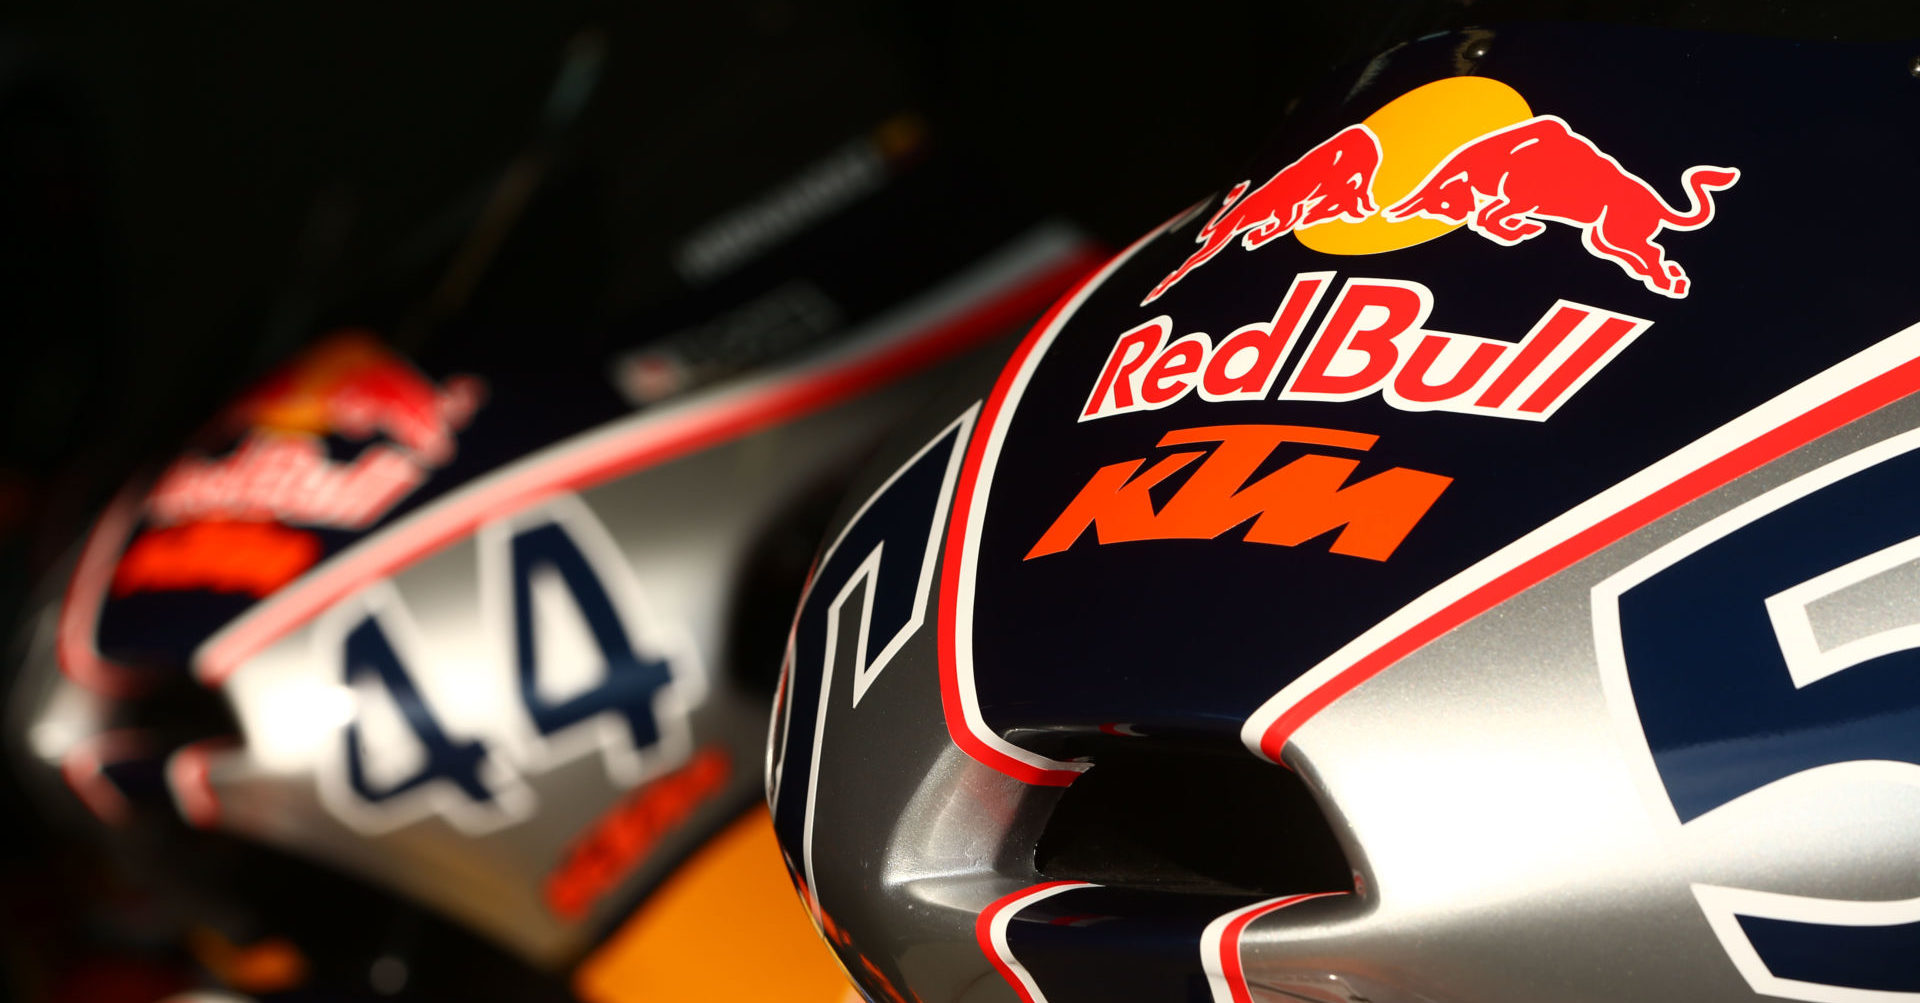 Red Bull MotoGP Rookies Cup KTM racebikes. Photo courtesy of Red Bull.